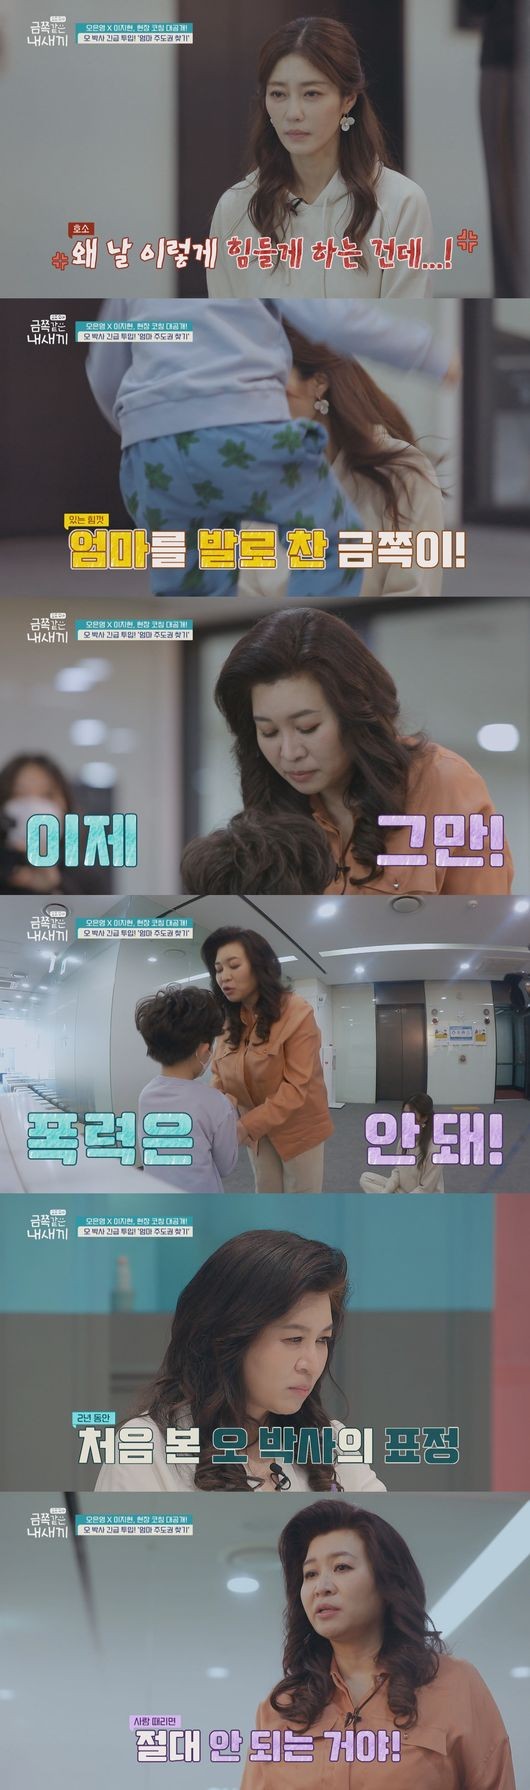 It is these days that the sadness and reprimand of Lee Ji Hyun, a so-called single mom from jewelry, is pouring at the same time.In the Channel A entertainment program Parenting - My Kid Like the Gold broadcasted today (25th), Lee Ji Hyun and the control Irreplaceable You ADHD son, the third story, are on the air.In the pre-released video, just before the 1:1 meeting with Oh Eun Young, there is an emergency situation where the gold side is swarming for no reason.Oh Eun Young goes directly to the scene for the right discipline guidance.The gold side struggles and riots in the hallway of the station, and Oh Eun Young sits across from Lee Ji Hyun with such a gold side between them and watches the situation silently.Soon, Oh Eun Young, who saw the act of the gold man who was saying Is your mother crazy?, directs Lee Ji Hyun to not answer anything with a gesture.When my mother does not respond, the gold side, who has been evil for a long time, is shocked by the indiscriminate assault, such as pushing Lee Ji Hyun and kicking him.Oh Eun Young, who eventually overpowered the hand of the gold hand, warns firmly that he should not hit people at all without shaking even in extreme rejection.After a while, the gold that exploded because it did not go to its will, Mother should apologize! And then rushes back to Lee Ji Hyun and starts beating.Even in the immediate situation, Oh Eun Young still tries to discipline by holding the hand of the gold one again in a calm manner and emphasizing again, It is an act that hurts others, never.Oh Eun Youngs charismatic eyes are impressive, looking at the gold side without moving.This 1:1 field coaching of Oh Eun Young is an extraordinary opportunity for Lee Ji Hyun.Recalling that many people who endure patience for a consultation with Oh Eun Young are actually present, it is safe to call for preferential treatment as an entertainer.In fact, online, you can find it difficult to say that you are waiting for a year to consult Oh Eun Young, and that it is not too much even if the consultation fee is high.In this situation, Lee Ji Hyuns unchanging behavior and situation inspires the anger of the viewers.Oh Eun Youngs consultation should regain the initiative as a mother as soon as possible, but the criticism of viewers has been on the worse after the solution.No matter how much Lee Ji Hyuns tendency is a problem, there is also an opinion that if there is a will, it can not be done.Lee Ji Hyun first appeared on My Little Girl Like Gold in February and released the story of the control Irreplaceable You ADHD son, Gu Young, and received much attention.At that time, Lee Ji Hyun was pointed out that he was swinging his son without measures, and that he was only taking his sons side in the Brother and Sister fight between his first daughter and his second son.Lee Ji Hyun explained, I do not discriminate against two children who love me differently from other parents.However, in this explanation, the first daughter still tears because of her brother, saying, It seems to ruin my life. Lee Ji Hyun does not discipline the child in his sons words, temper, and violent tendencies, but rather weakens his heart and responds emotionally.Lee Ji Hyun, a single mother and working mother who has a daughter and son alone after two divorces, said, Children are not like math formulas.His grievance is deeply sympathetic, but Lee Ji Hyun must imitate Oh Eun Young, who overpowered the right hand with his bare hands.Thats also a dory for other parents waiting to be choked off Oh Eun Youngs solution.Captured on My Son of a bitch broadcast